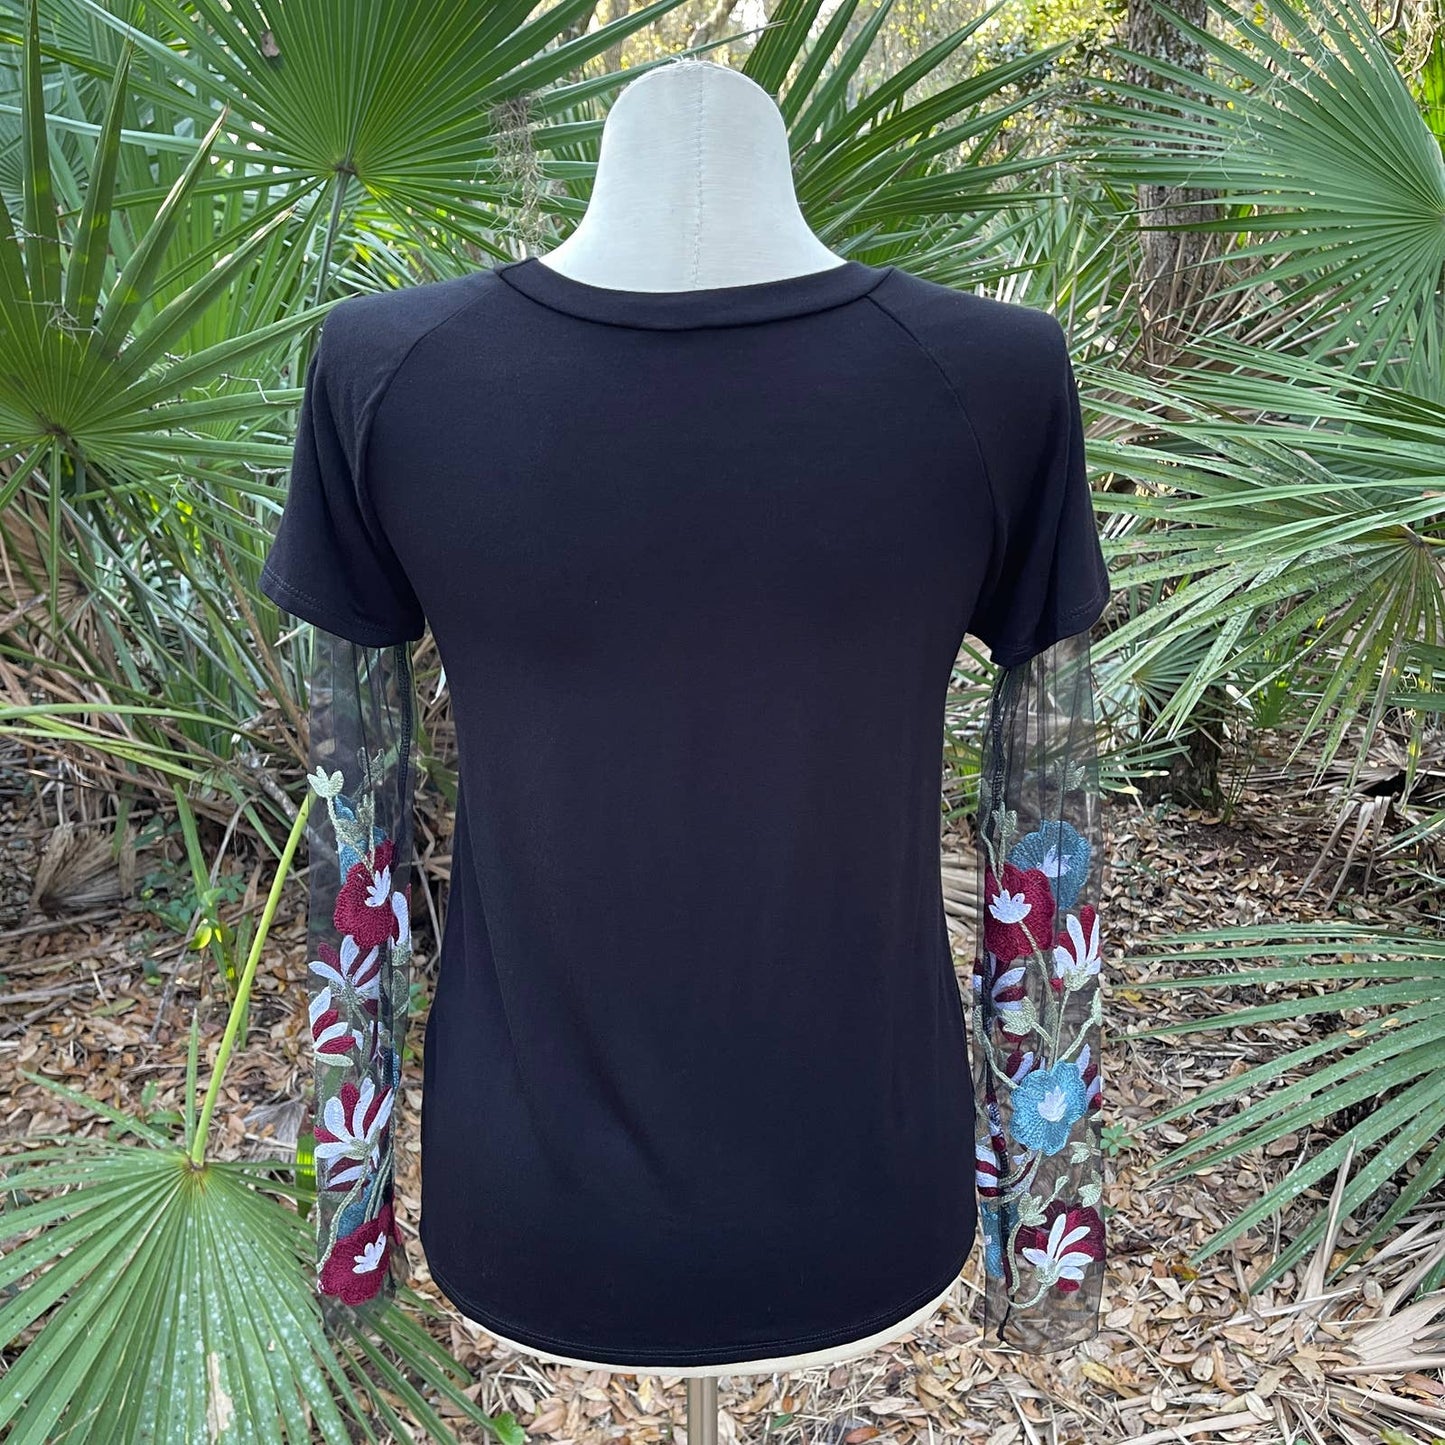 Black Tee Shirt with Mesh Sleeves Embroidered Soft Veveret Size S